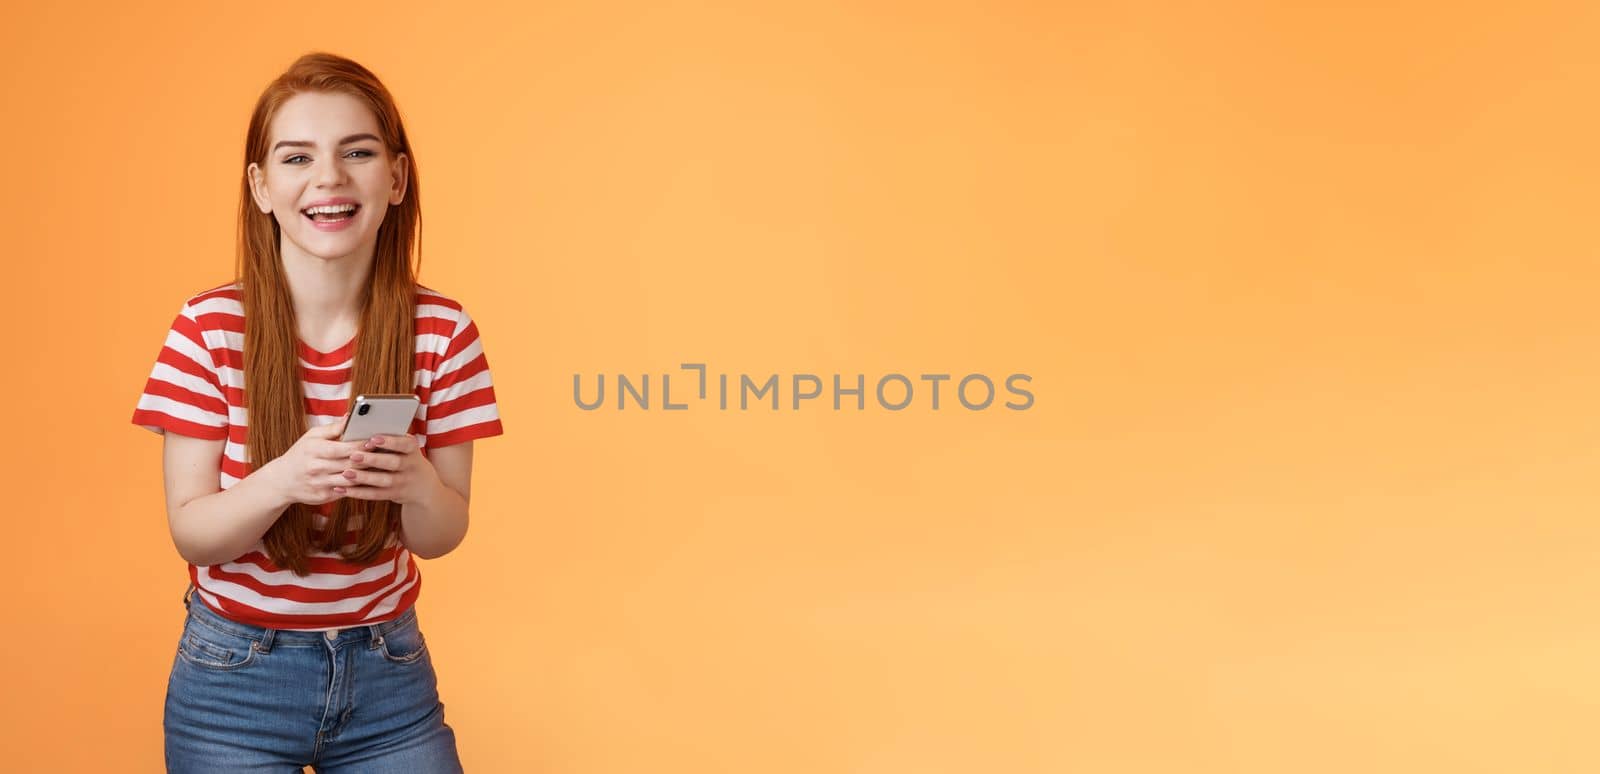 Carefree attractive woman red long hair laughing amused, having fun, chatting friend, hold smartphone, look camera sincere rejoice smile, texting joke, found funny meme internet, orange background.